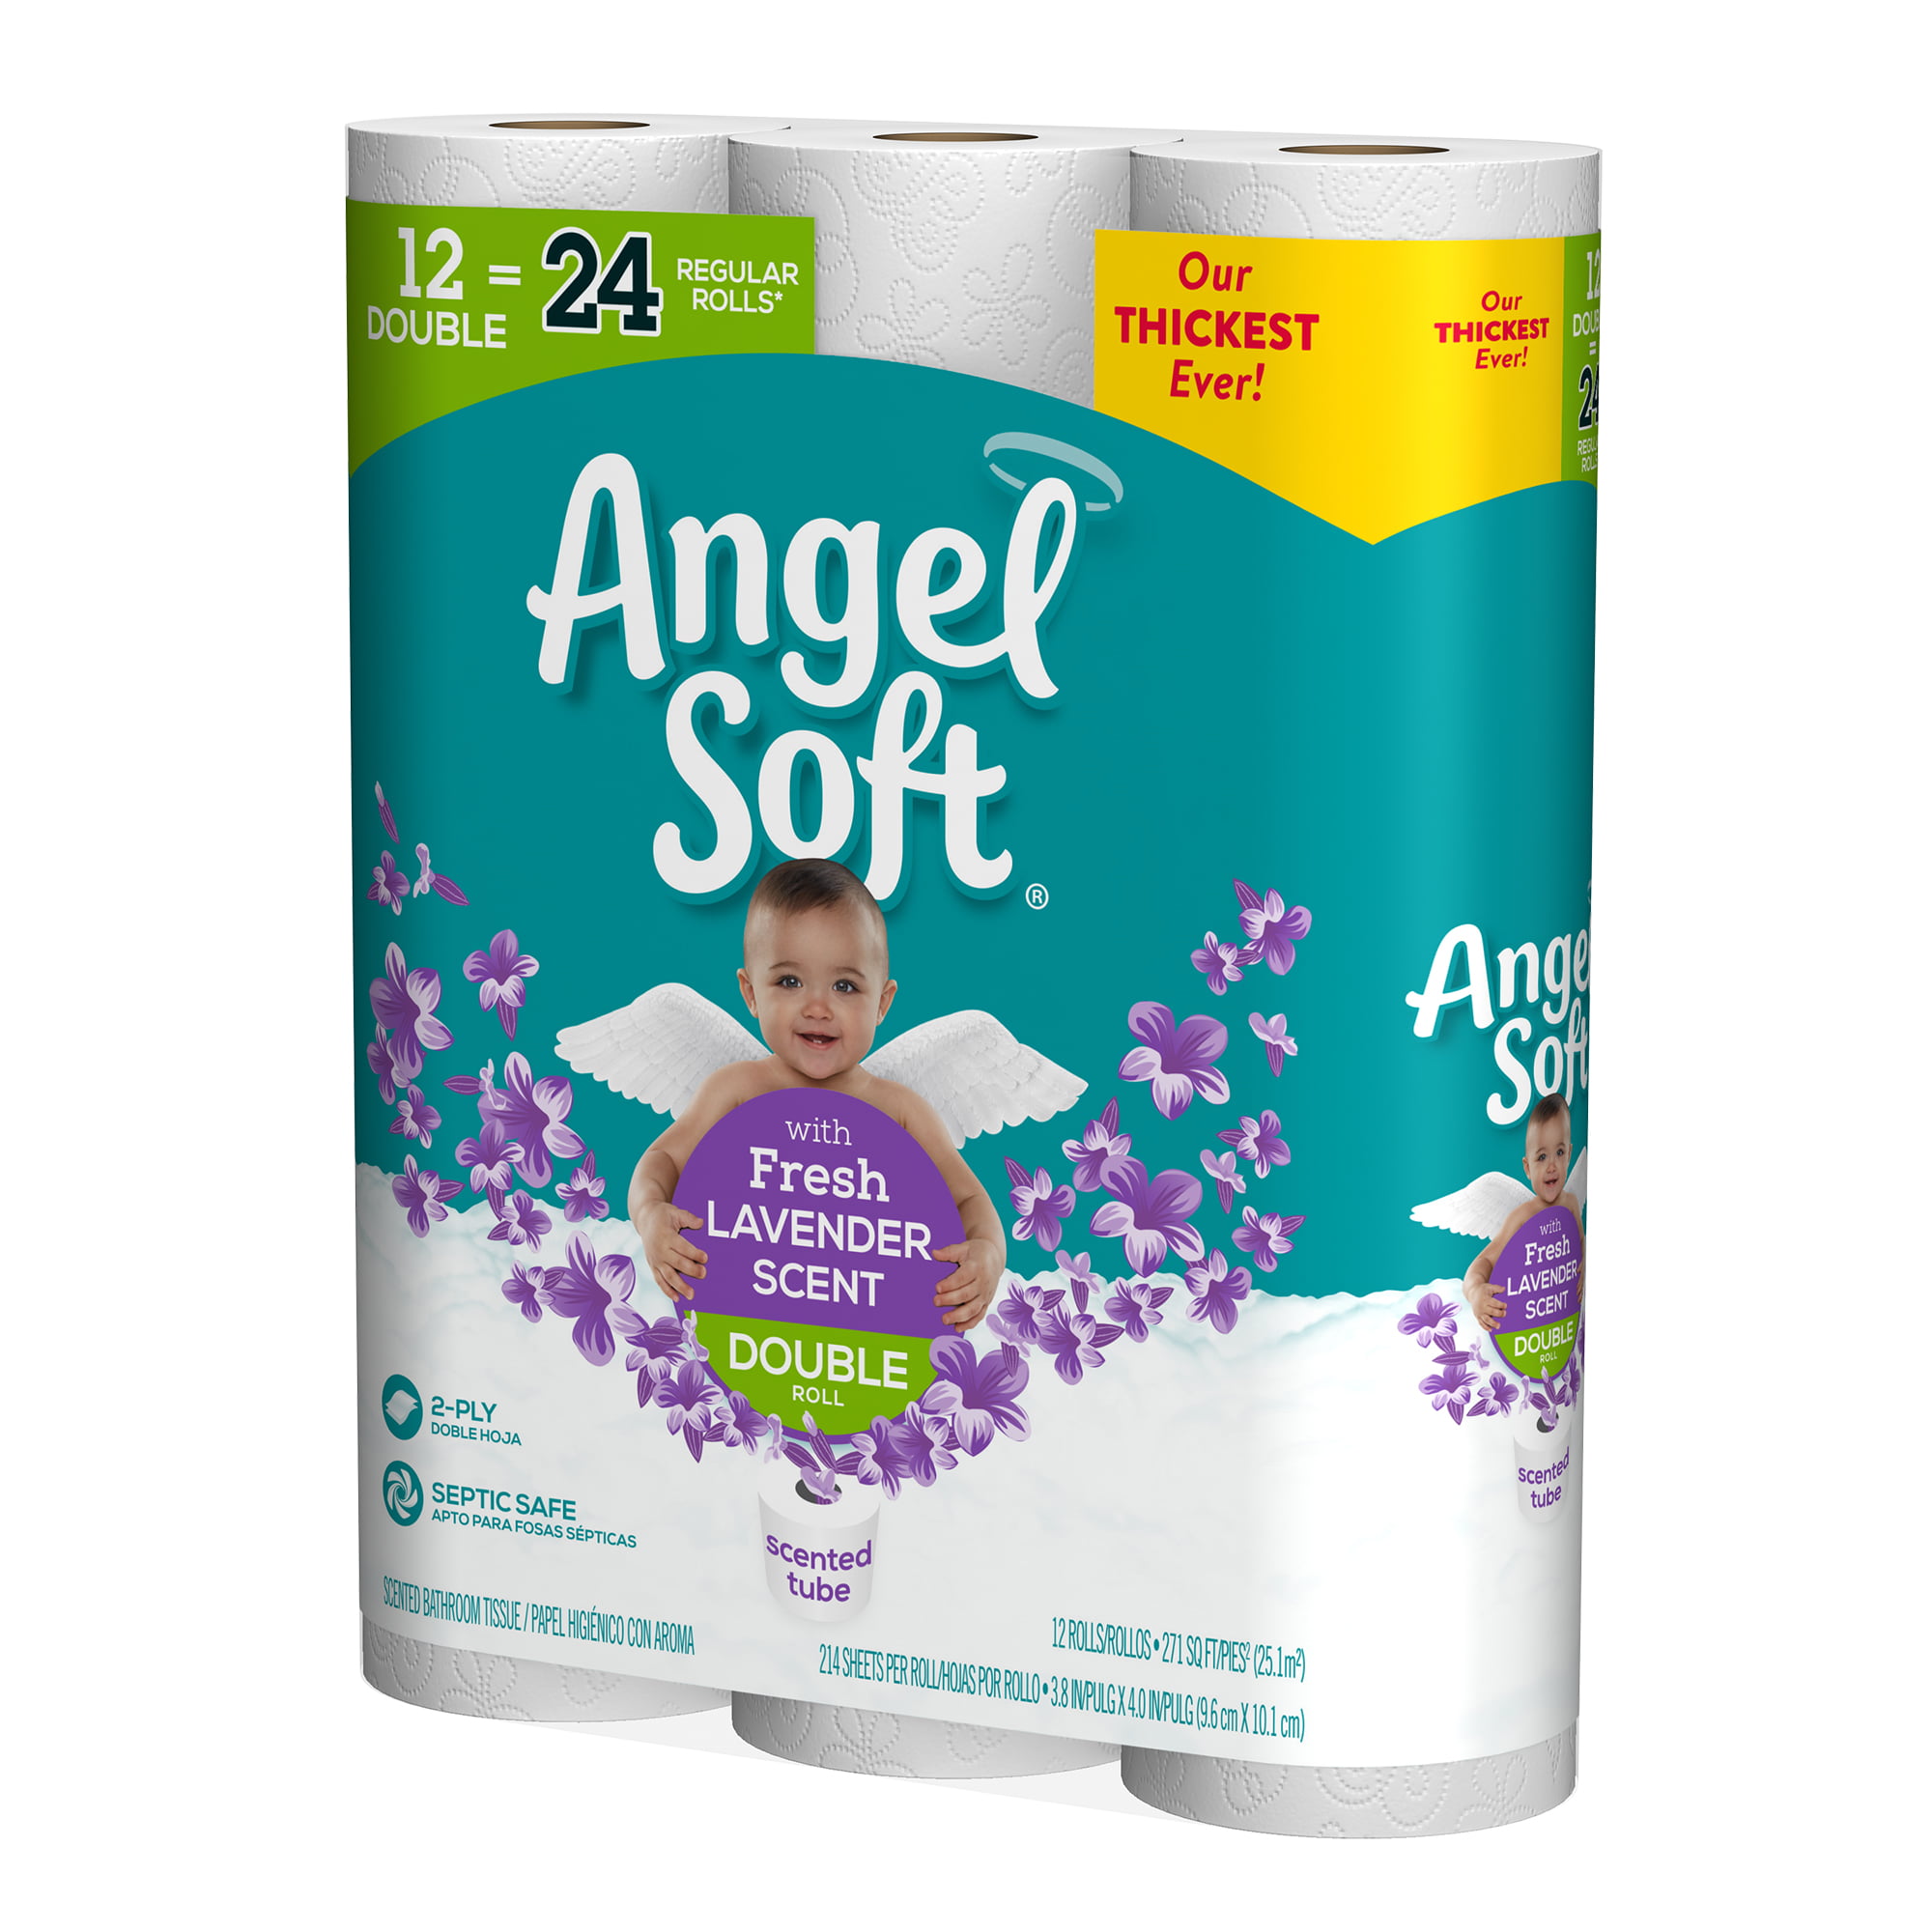 Angel Soft Toilet Paper with Fresh Lavender Scent, 12 Double Rolls - 2